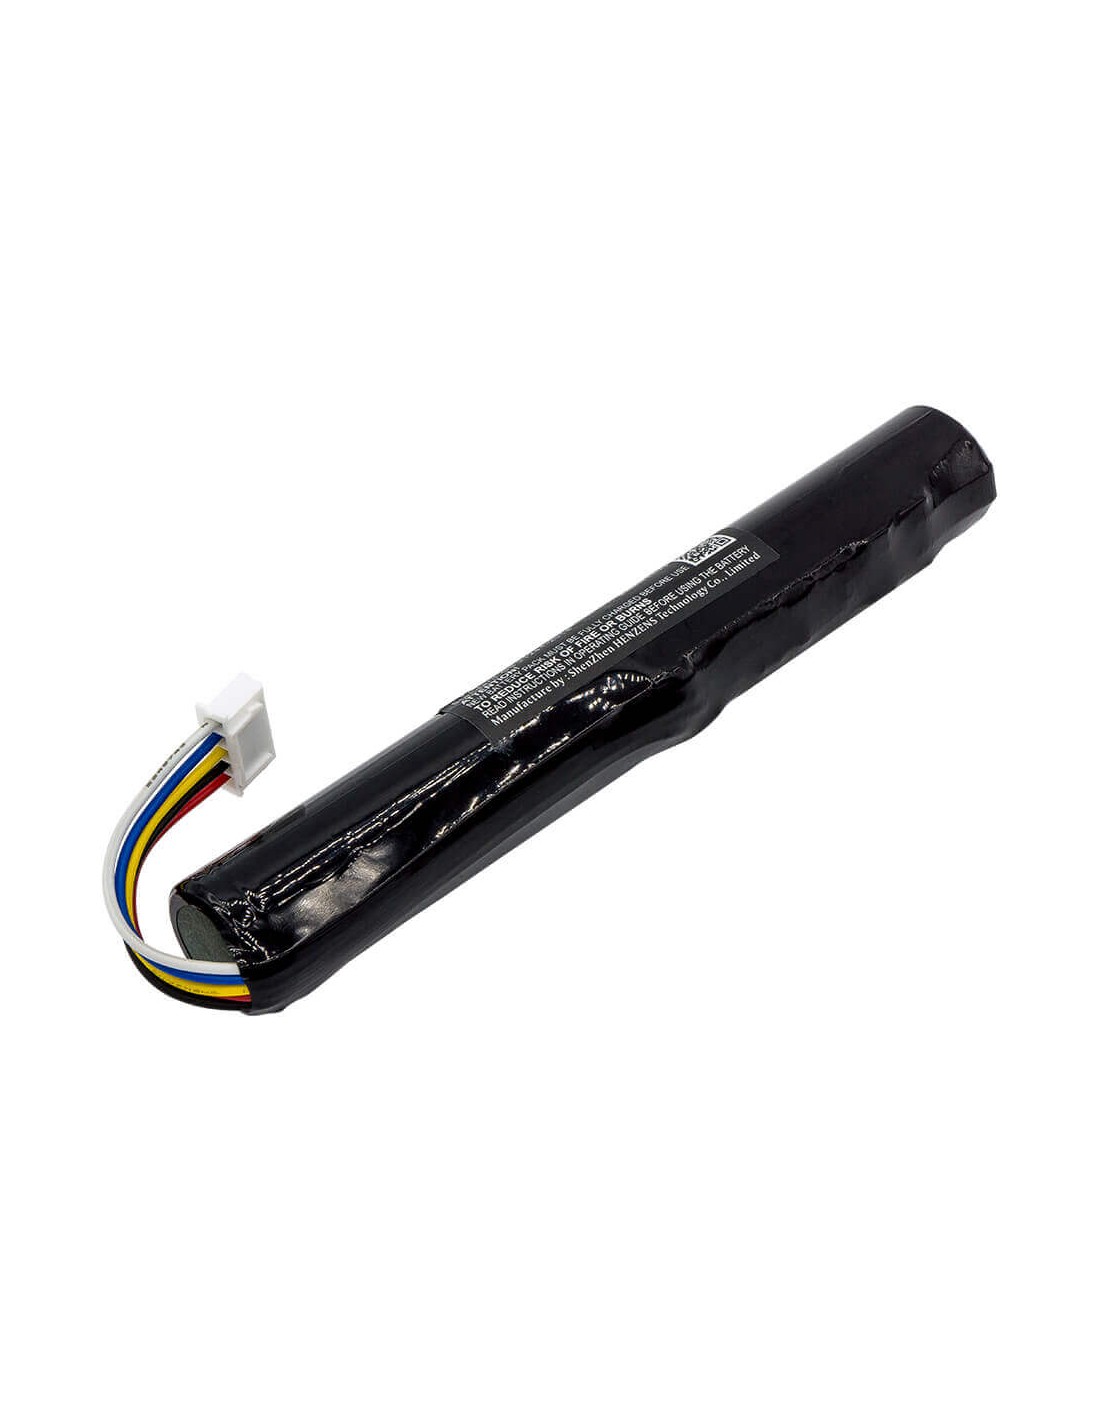 Battery for Bang & Olufsen, Beolit 15, Beolit 17, Beoplay A2, Beopl 7.4V, 2600mAh - 19.24Wh